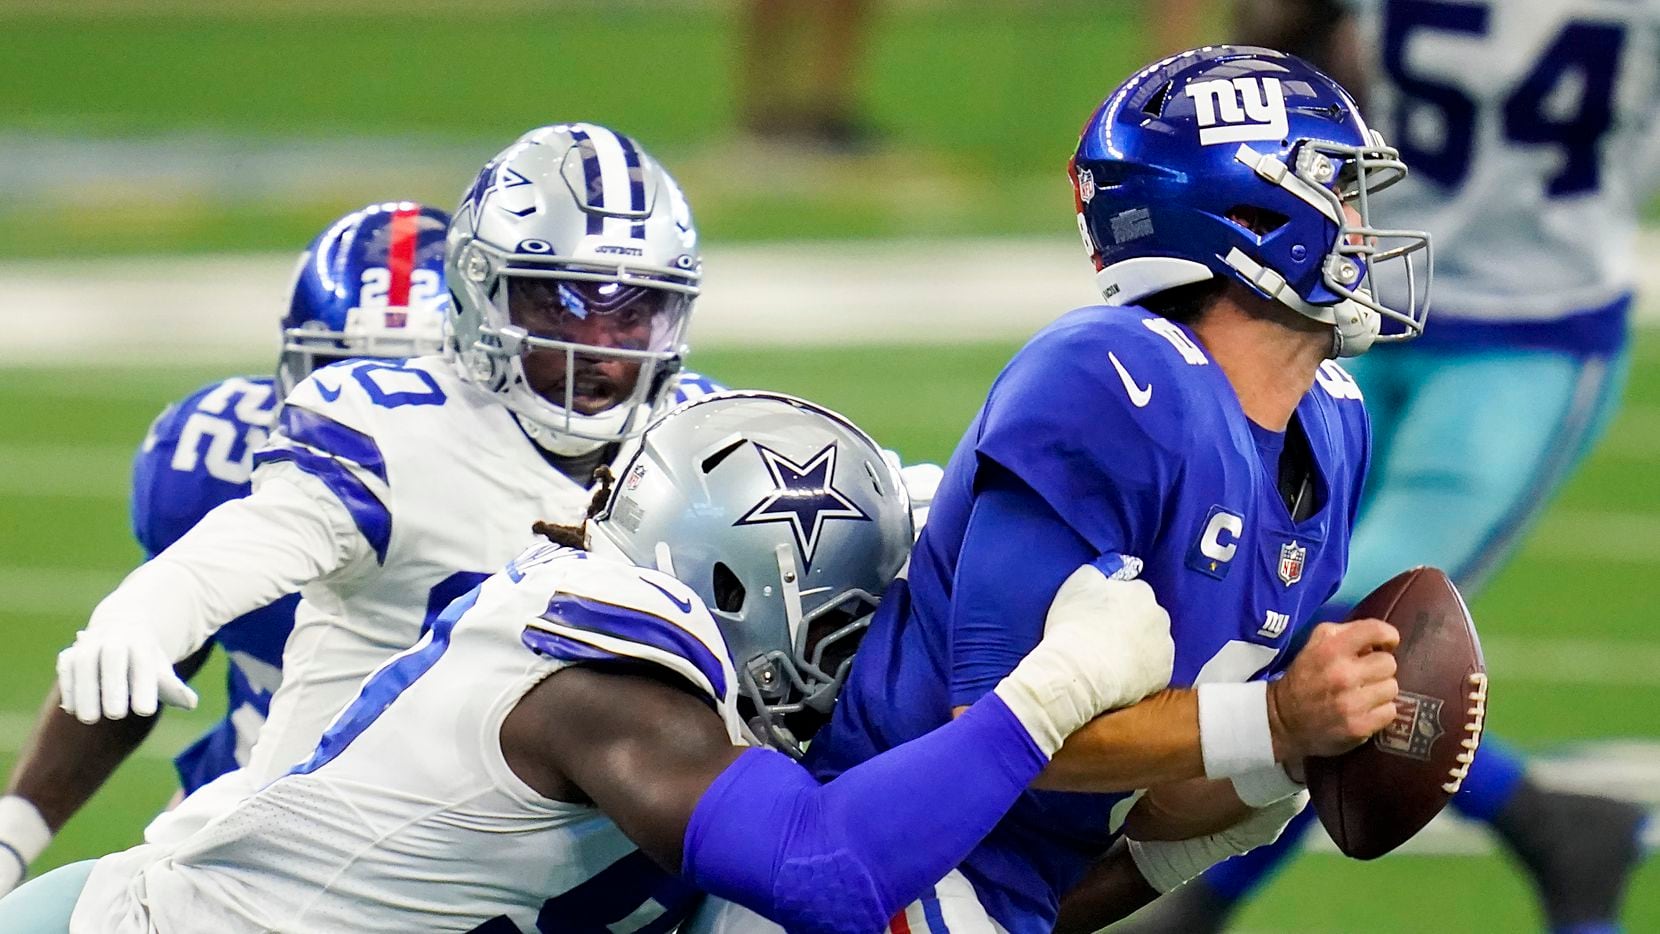 Giants quarterback Daniel Jones (8) fumbles as he is hit by Cowboys defensive end DeMarcus Lawrence (90) during the second quarter of a game on Sunday, Oct. 11, 2020, at AT&T Stadium in Arlington.